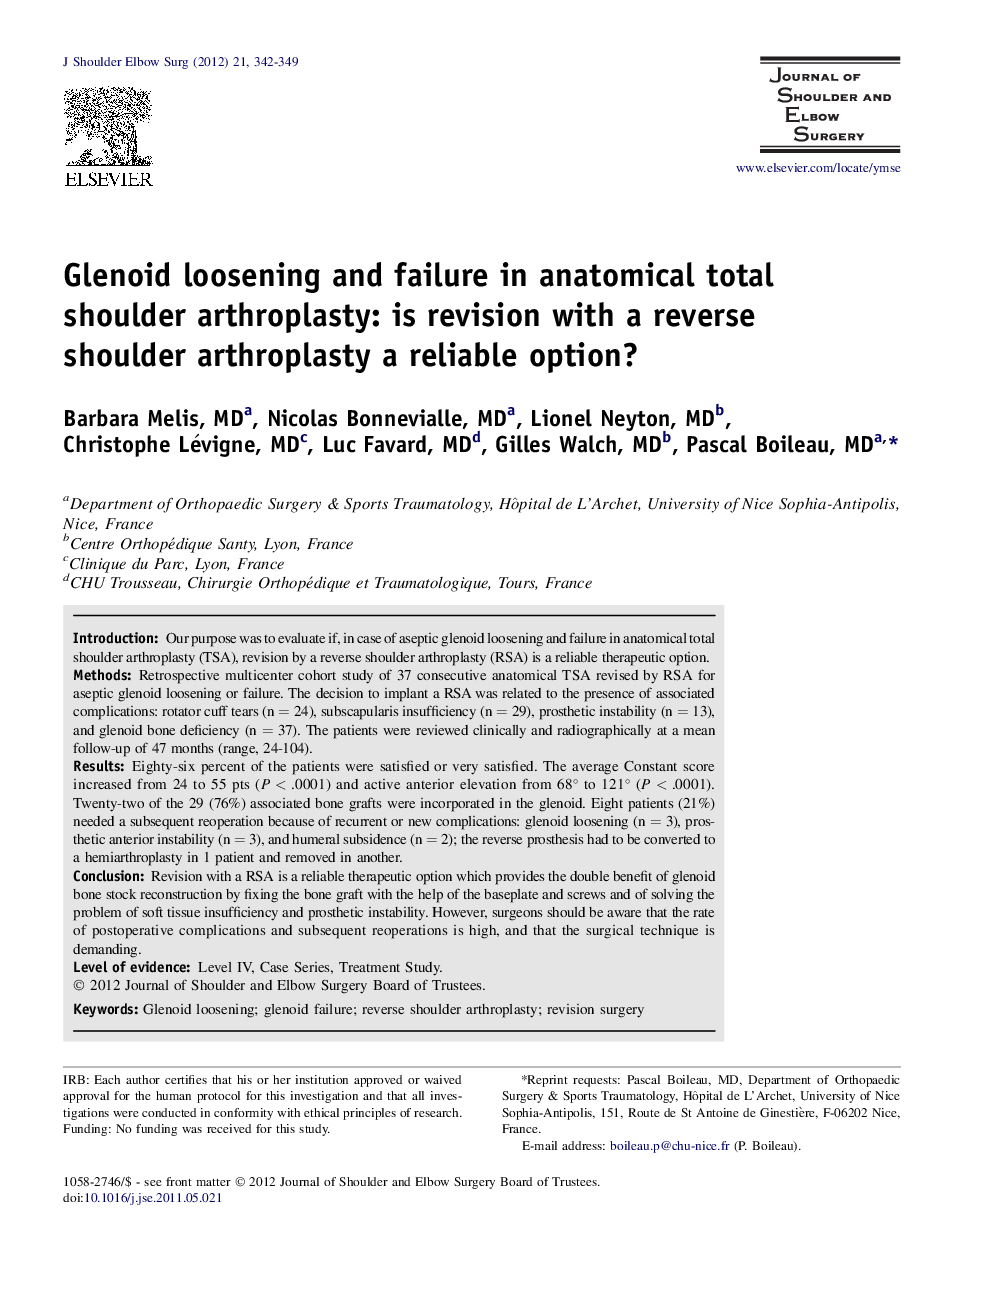 Glenoid loosening and failure in anatomical total shoulder arthroplasty: is revision with a reverse shoulder arthroplasty a reliable option? 